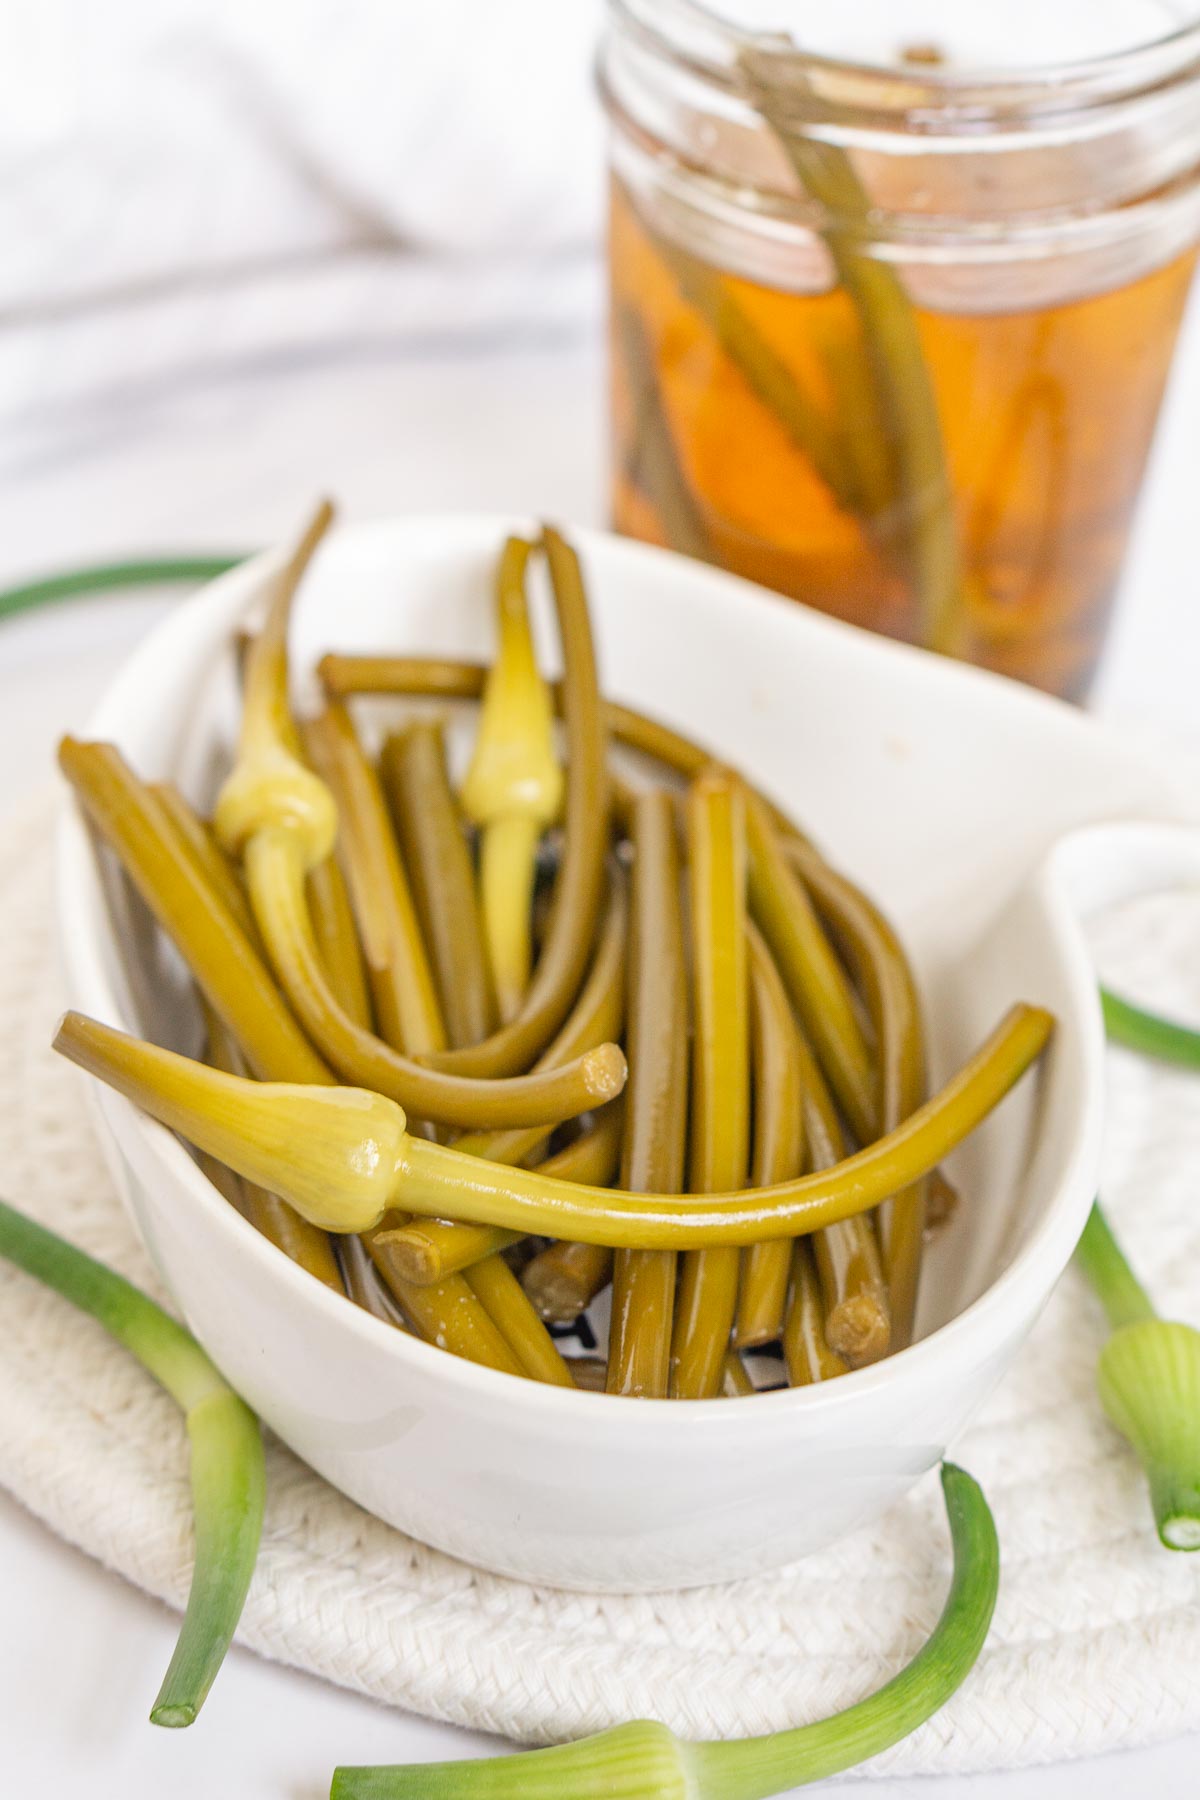 Plate of pickled garlic scapes with a jar in the background